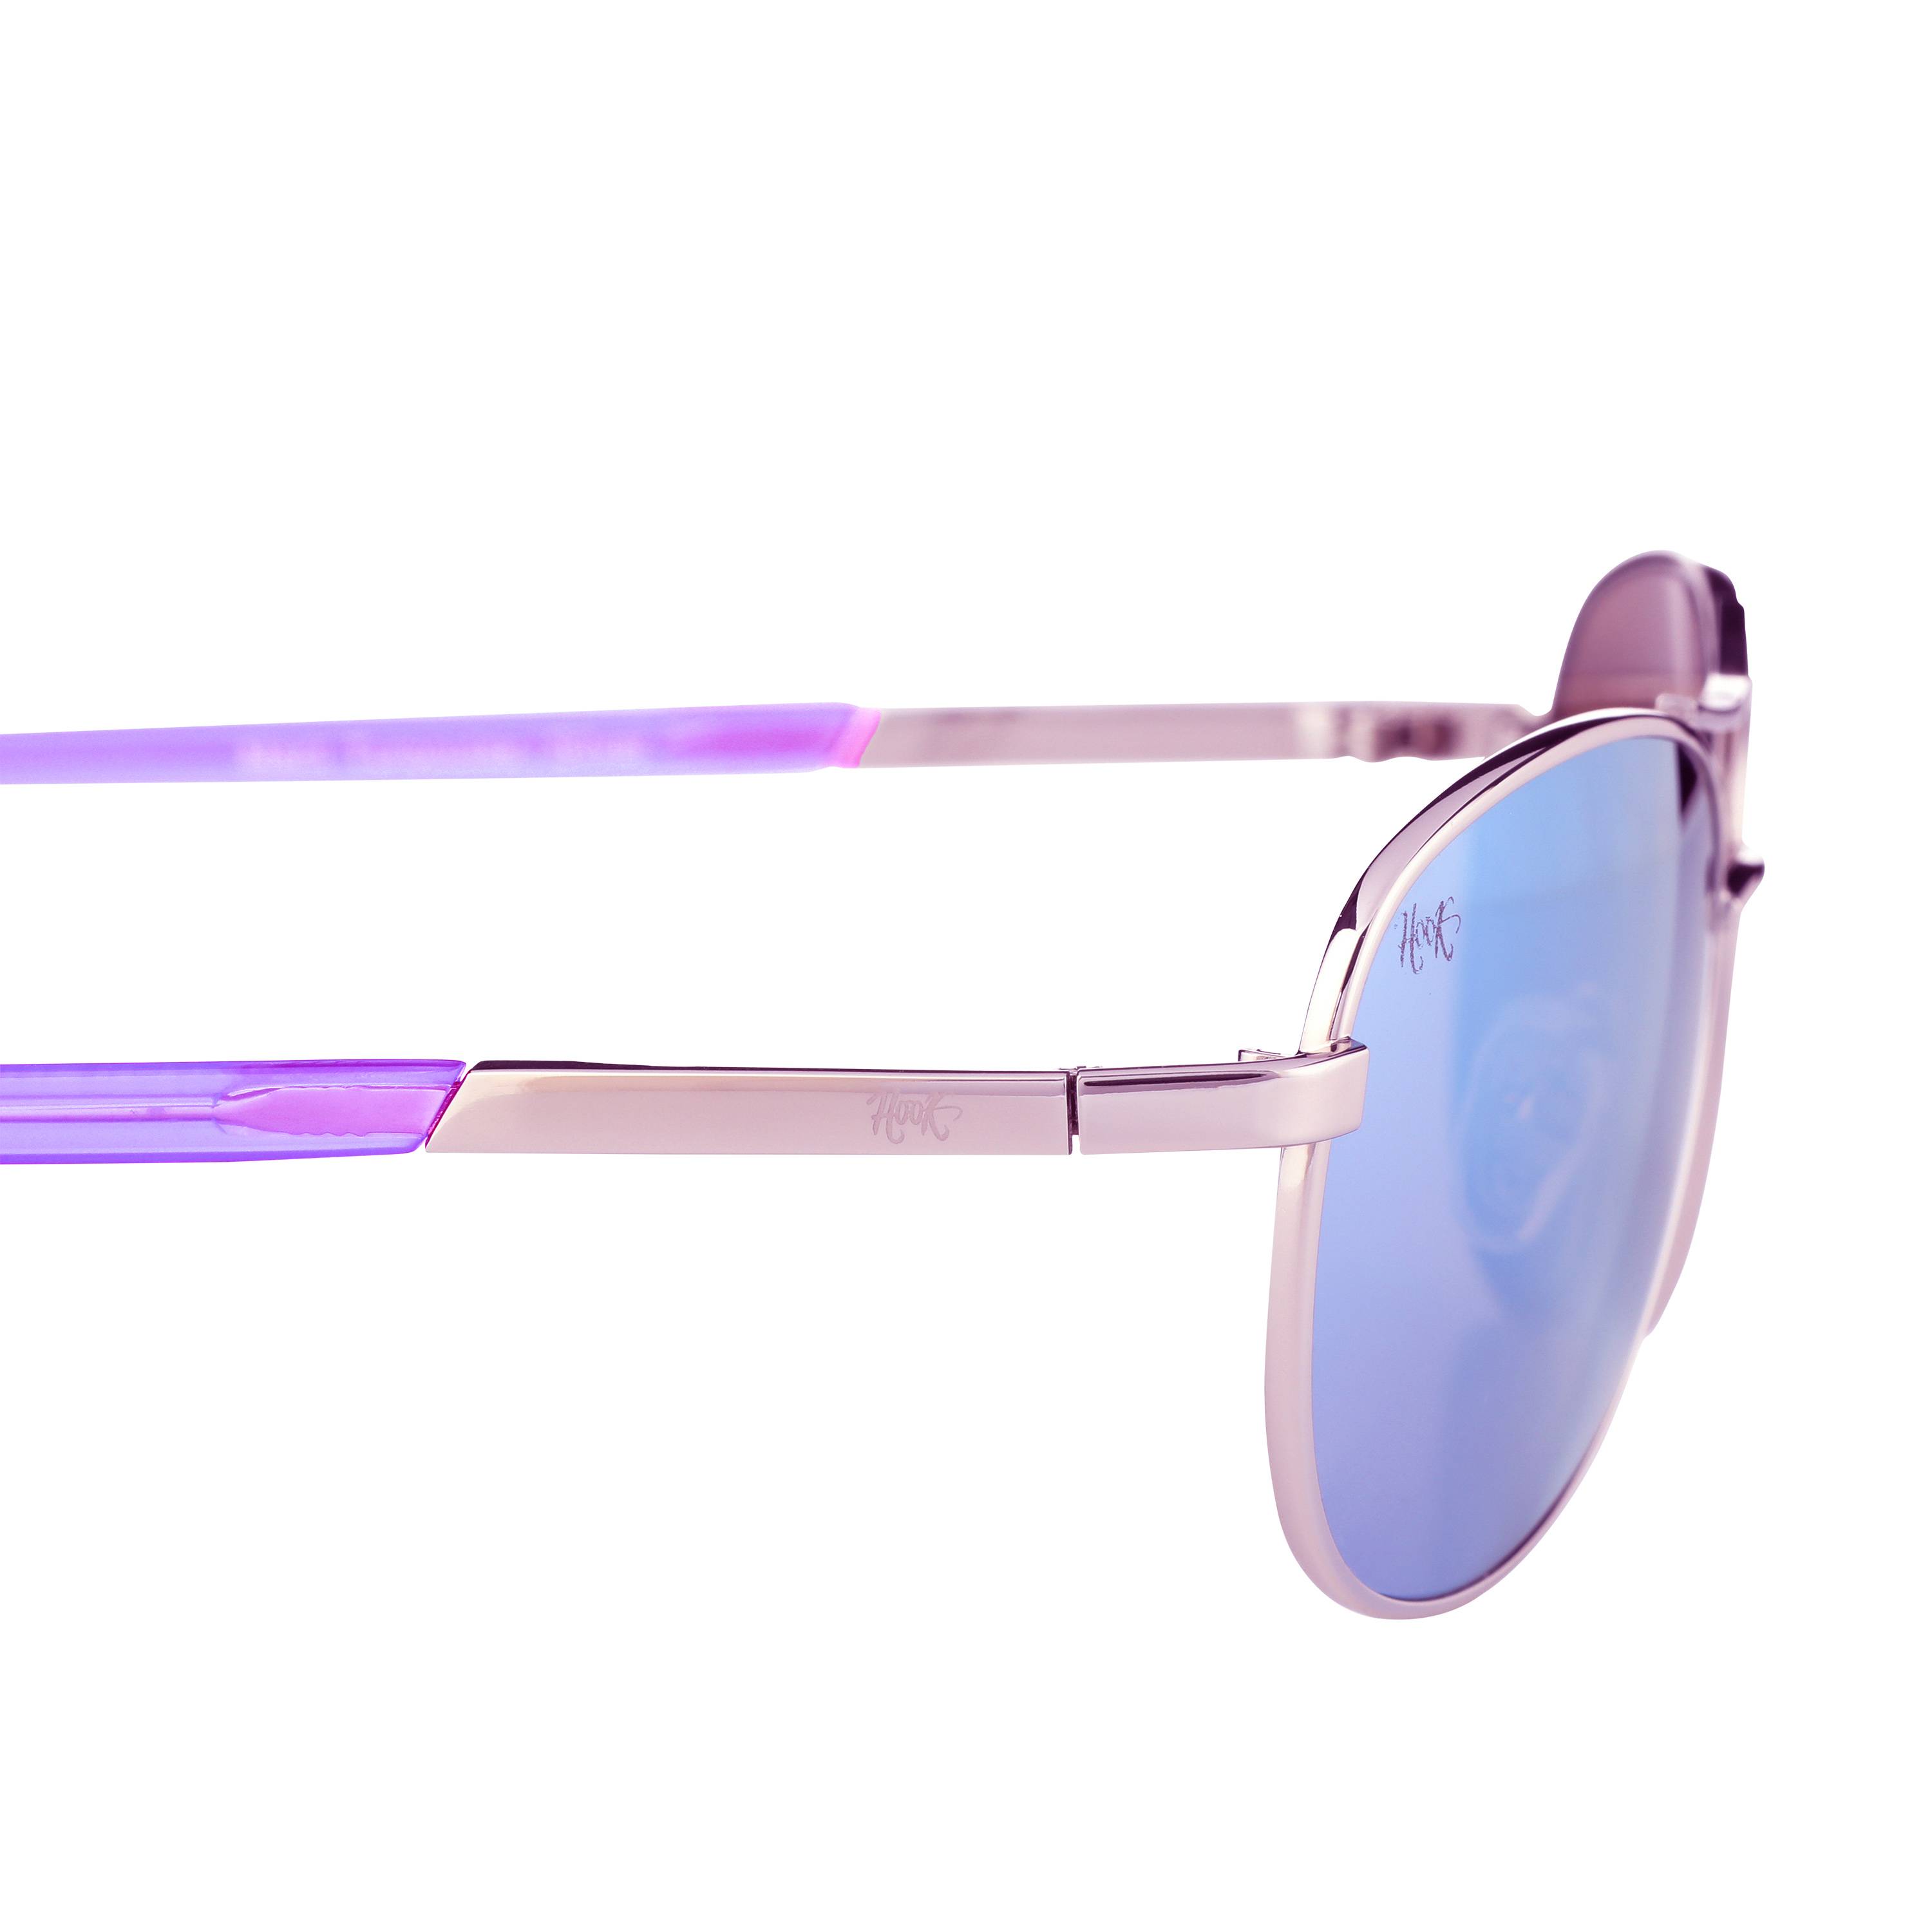 Aviator Sunglass Classic Style, Great Fitting Sunglasses for Narrow Faces